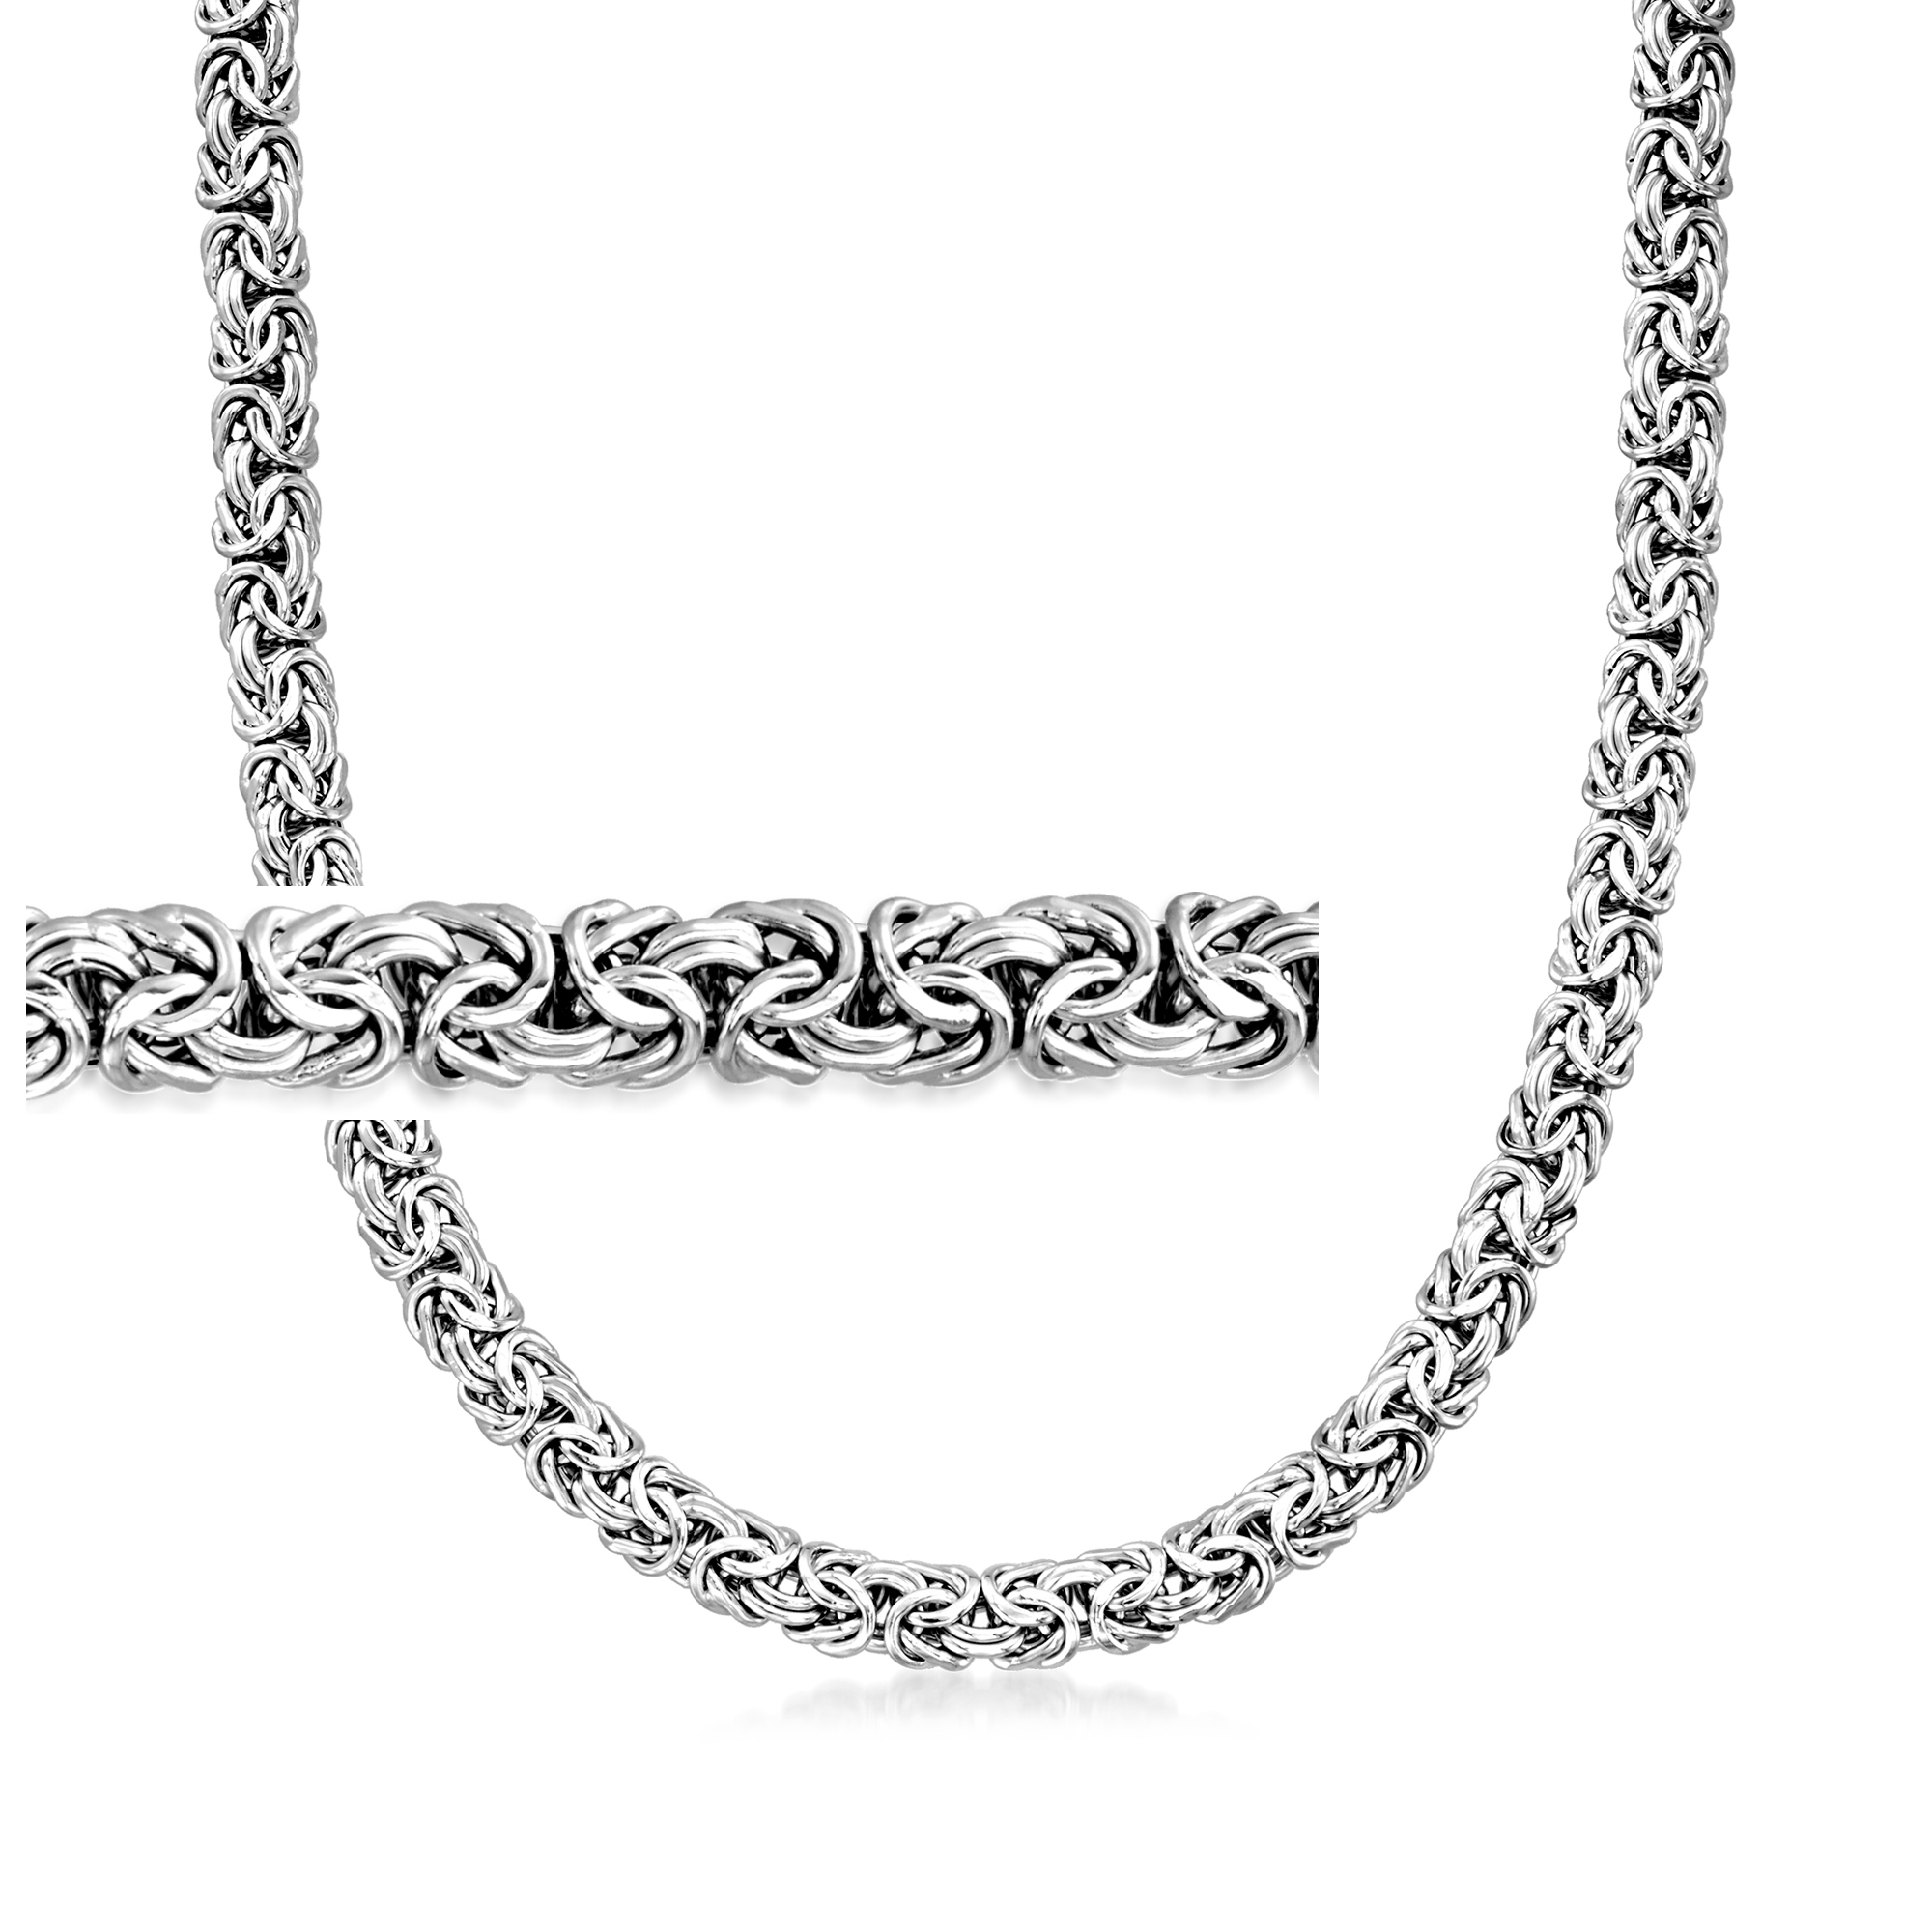 Byzantine Variation # 2 in Sterling Silver — Pat Brazill Chain Maille  Jewelry llc